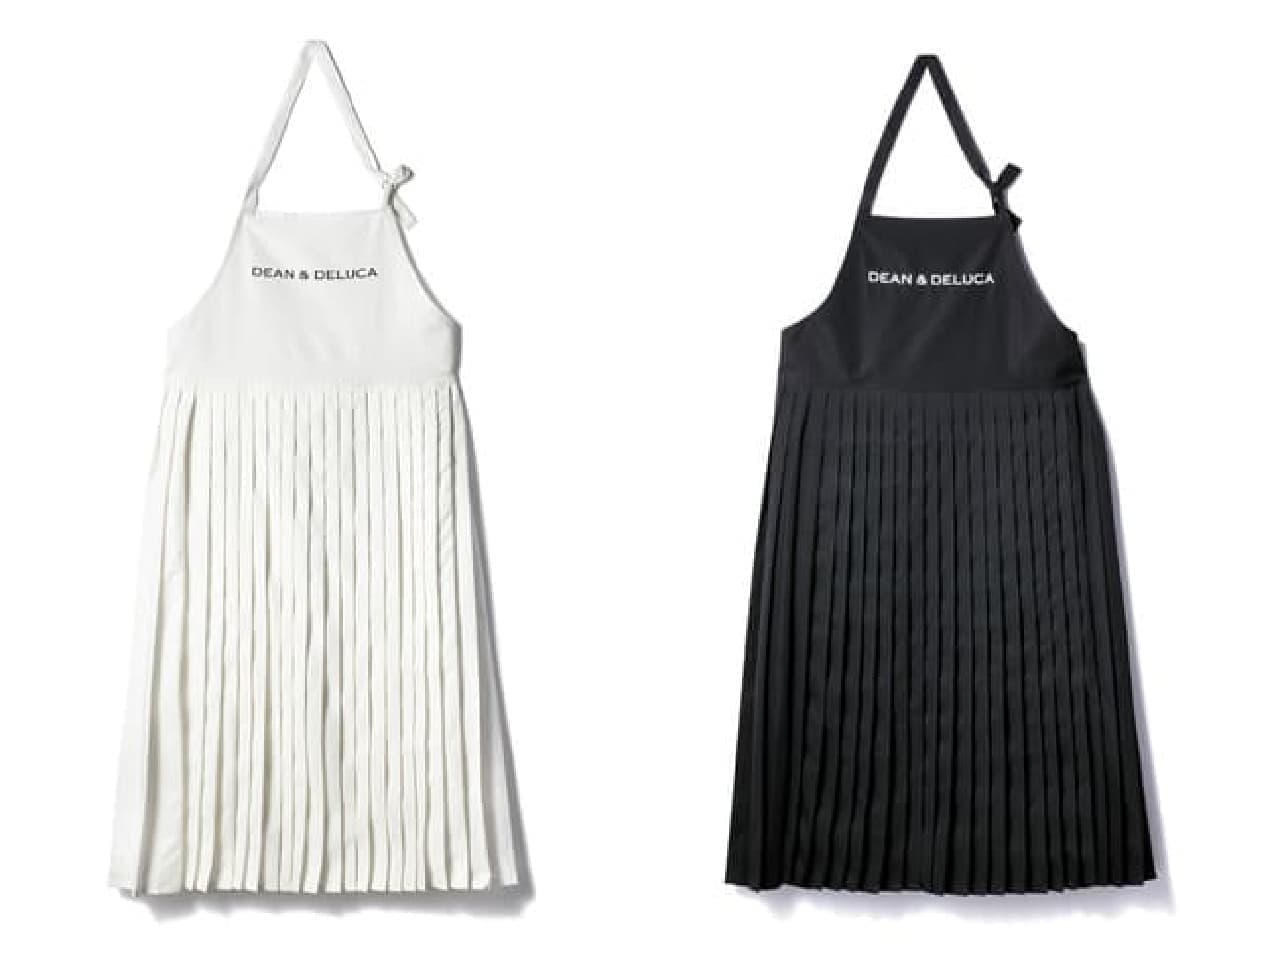 DEAN & DELUCA x BEAMS COUTURE Collaboration -- Feminine Apron, Kappo-gown, and Basket Bag with Cooling Function